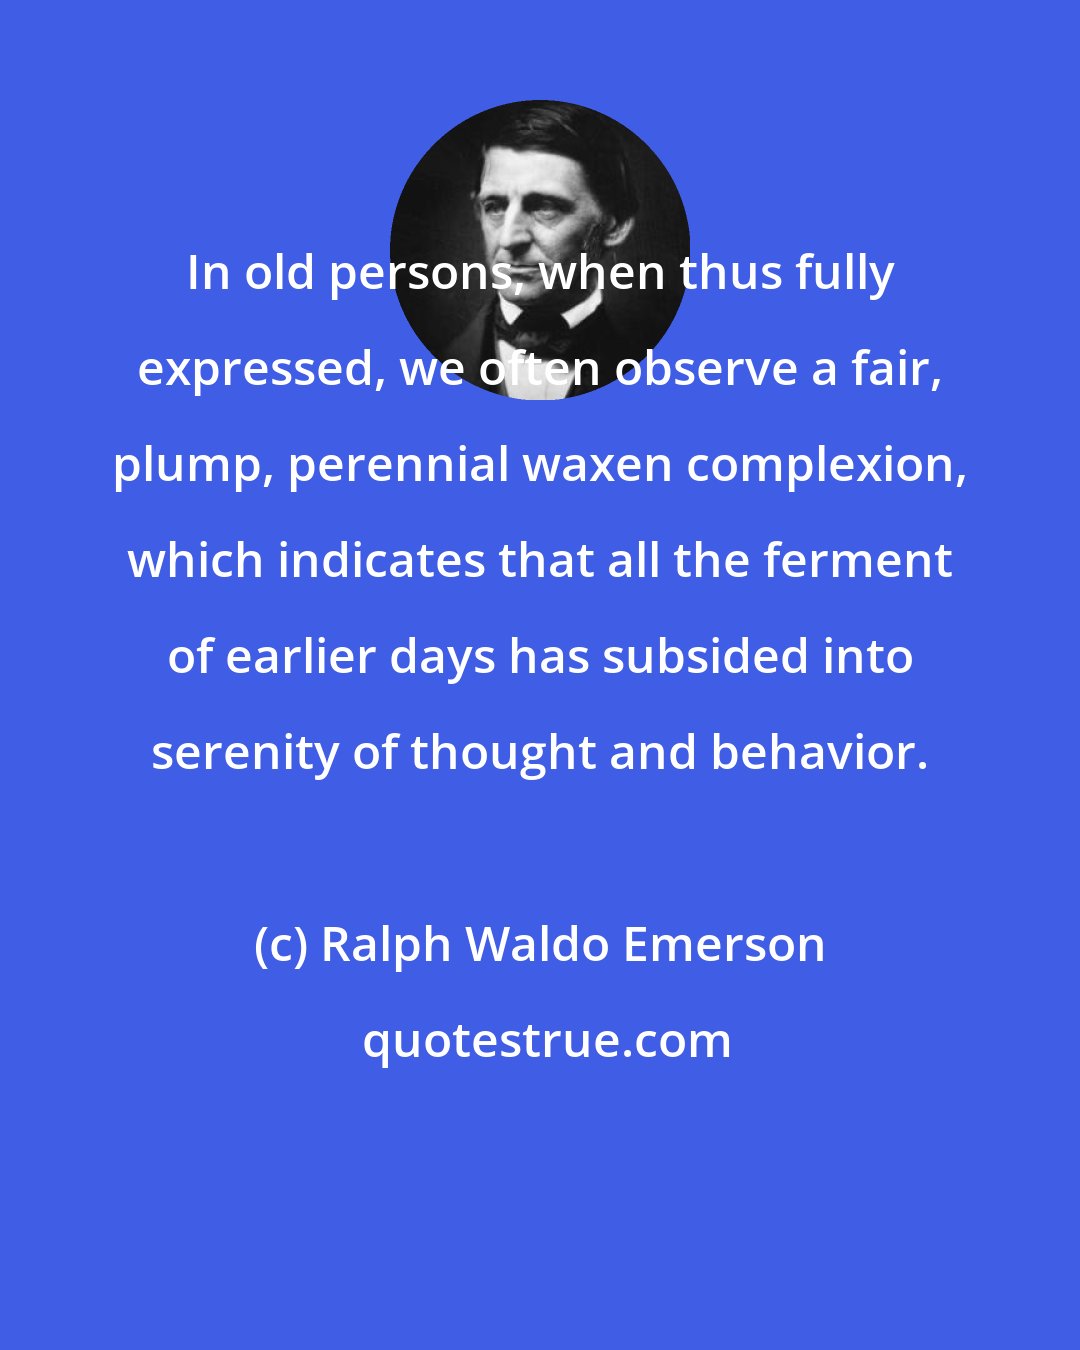 Ralph Waldo Emerson: In old persons, when thus fully expressed, we often observe a fair, plump, perennial waxen complexion, which indicates that all the ferment of earlier days has subsided into serenity of thought and behavior.